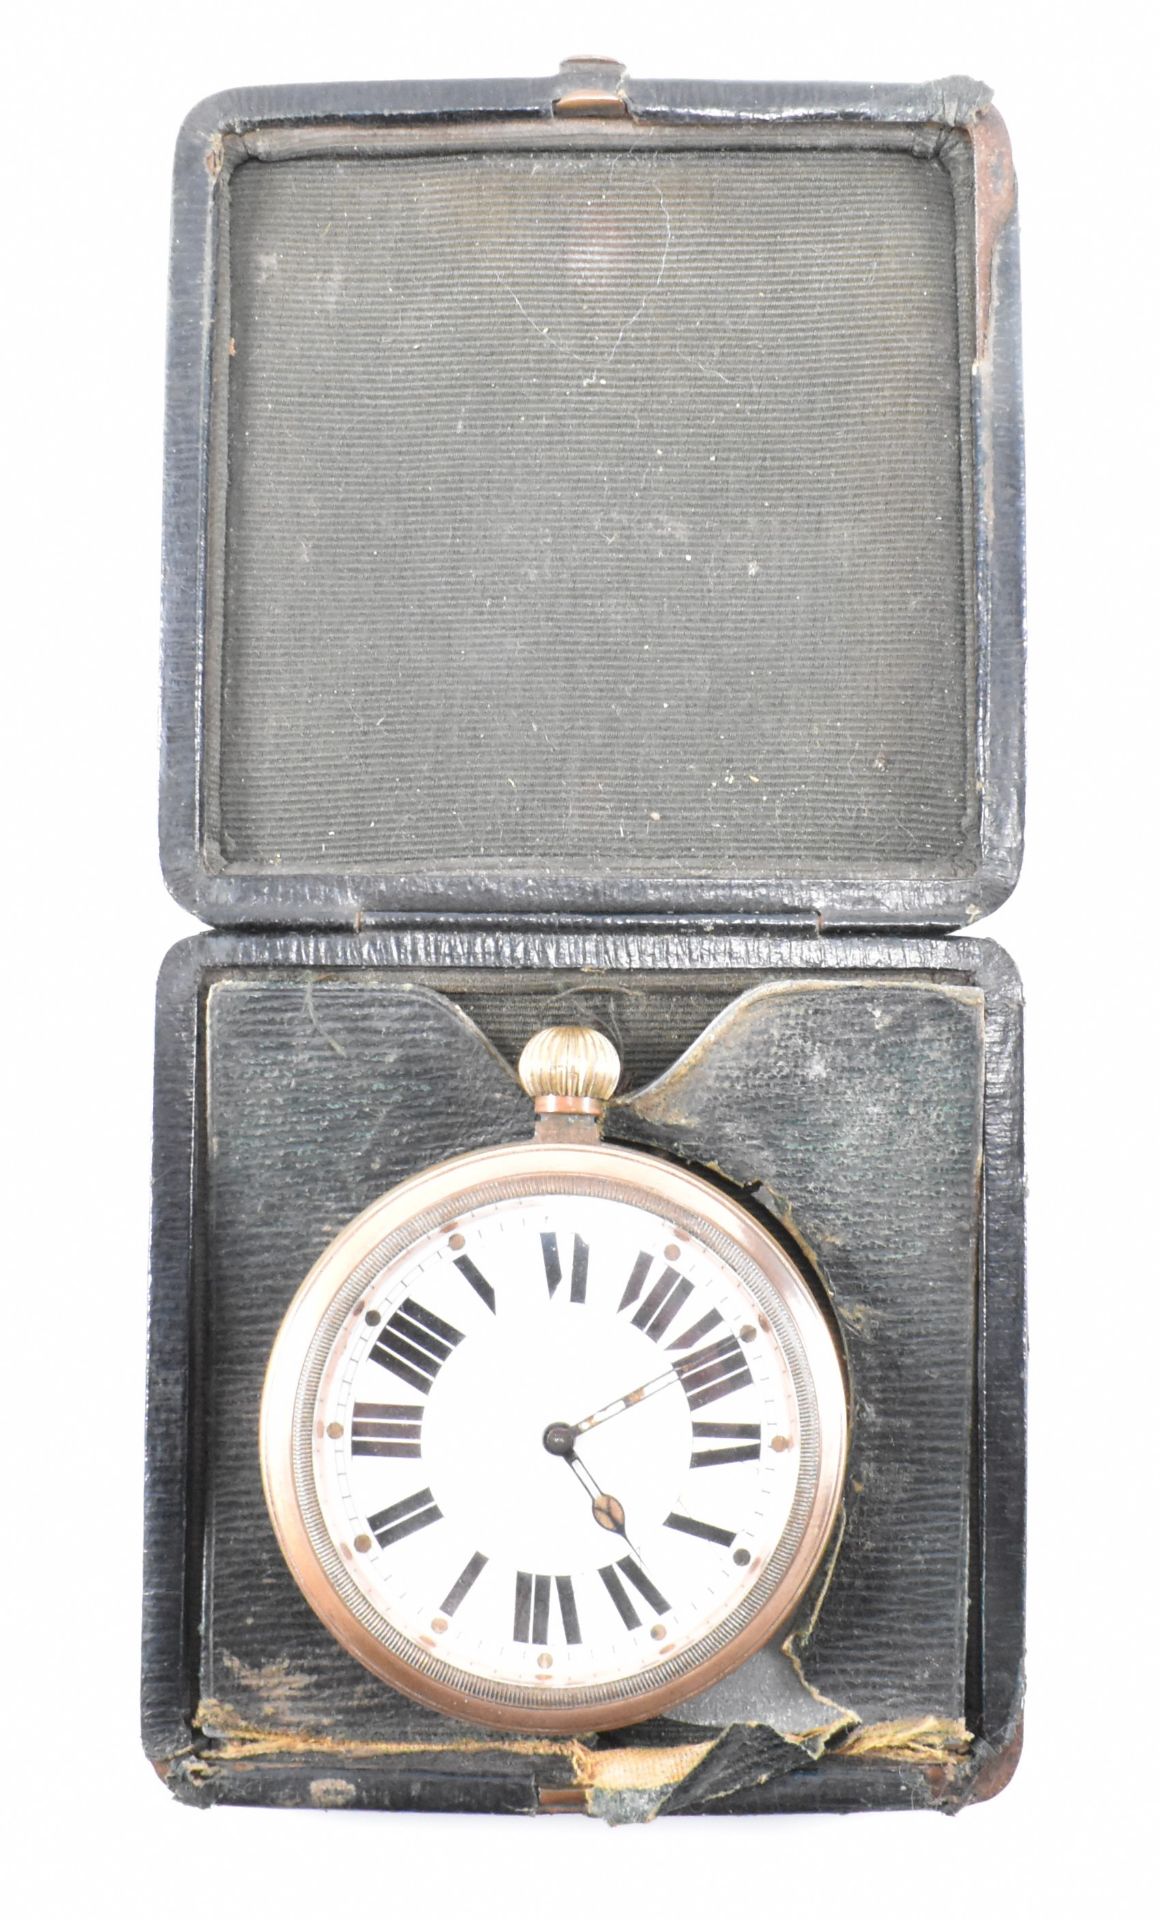 EARLY 20TH CENTURY GOLIATH POCKET WATCH - Image 3 of 3